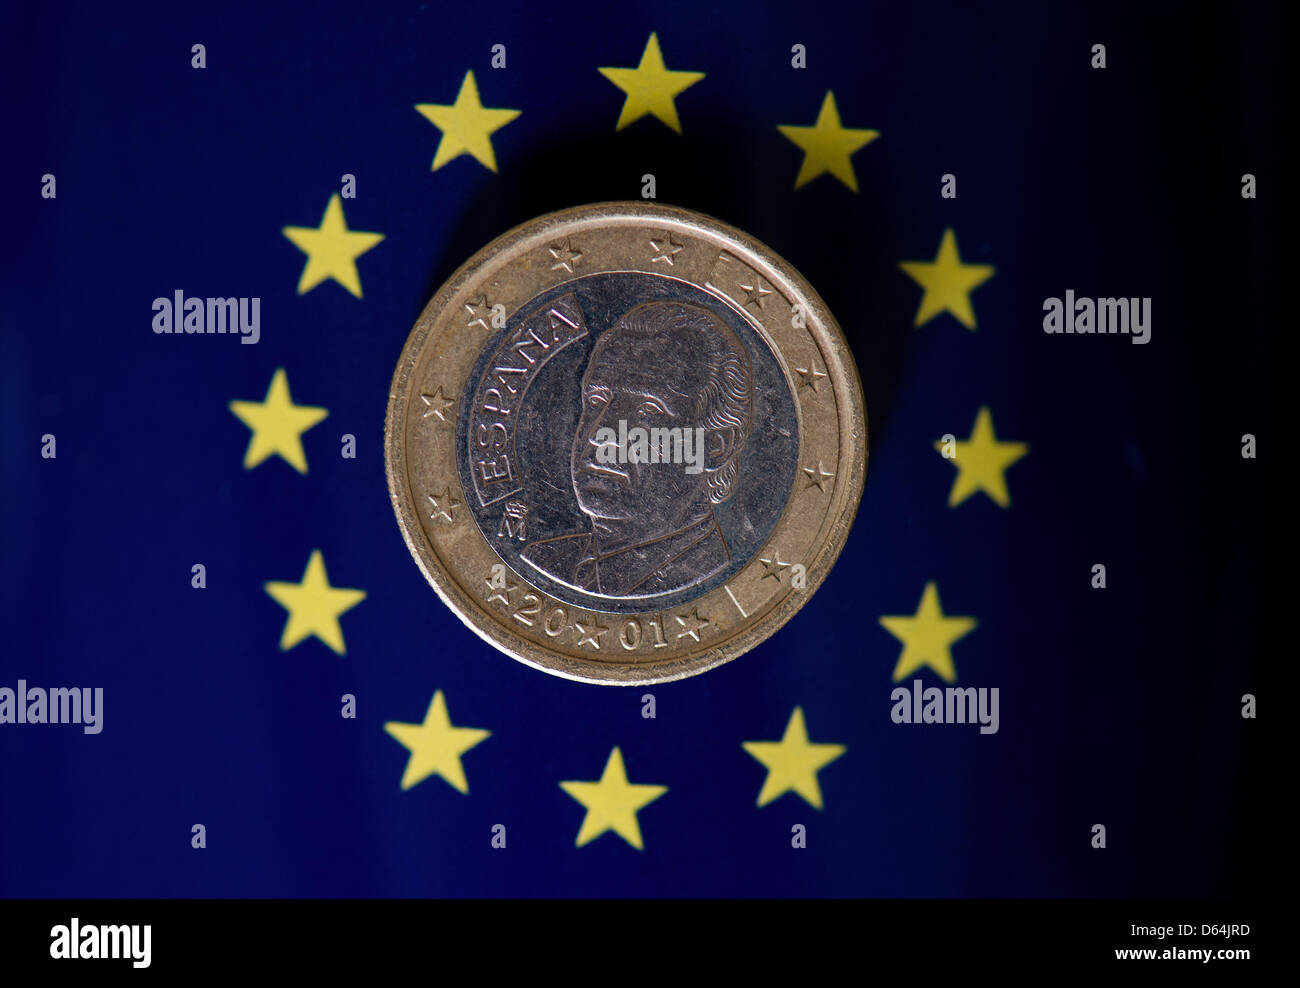 The illustration shows the Spanish edition of a Euro coin on display on an emblem featuring the symbol of the European Union in Dresden, Germaany, 23 April 2012. Photo: Arno Burgi Stock Photo